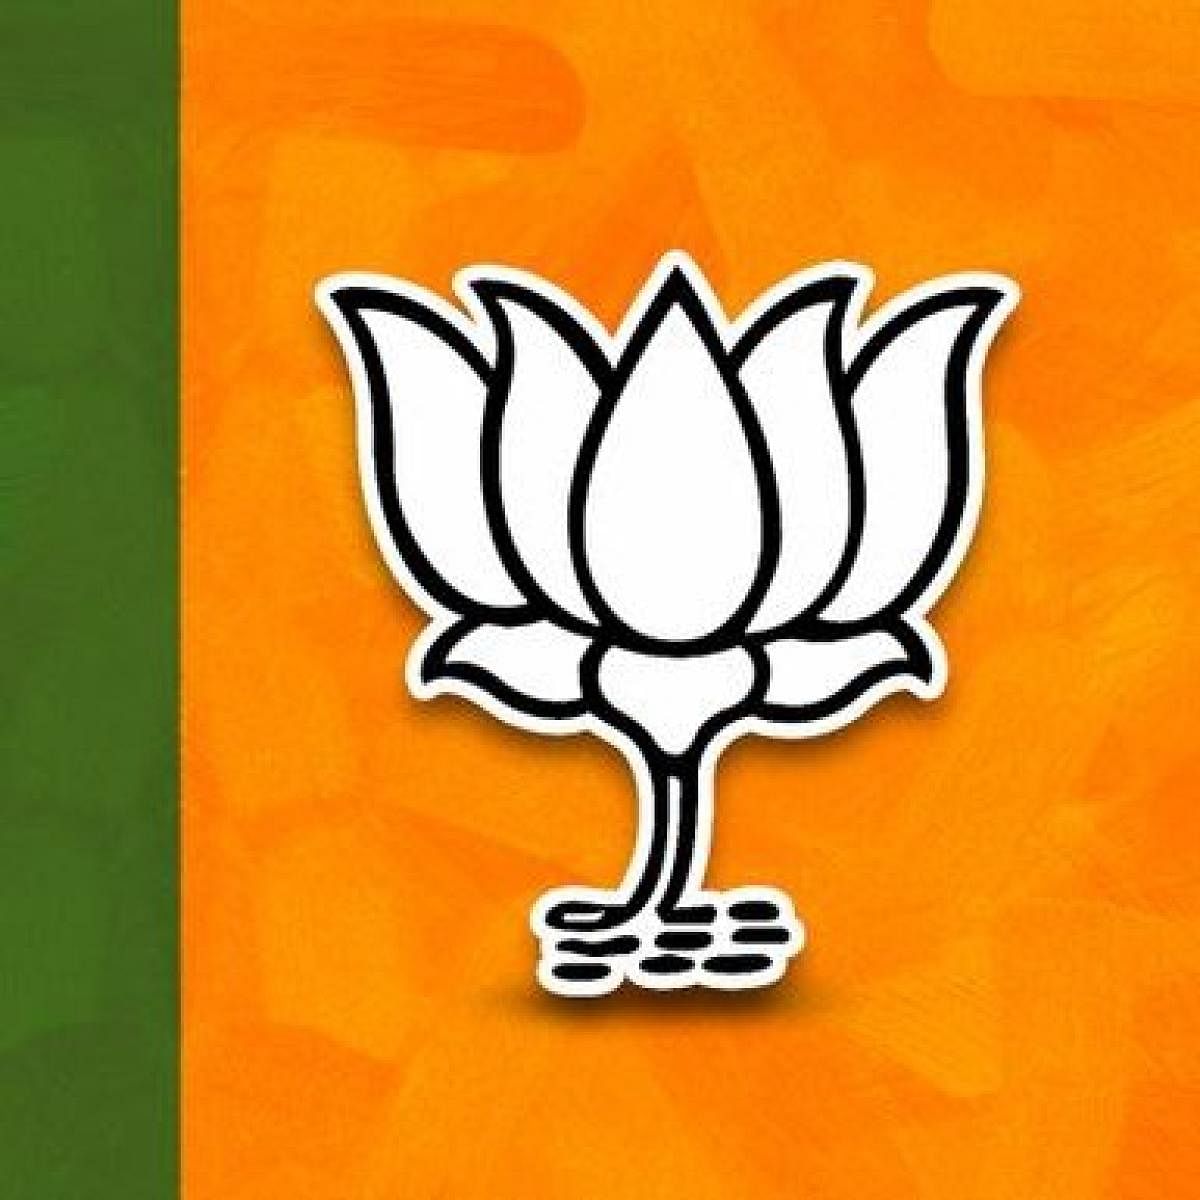 BJP registered a victory in the by-poll at Hamirpur assembly